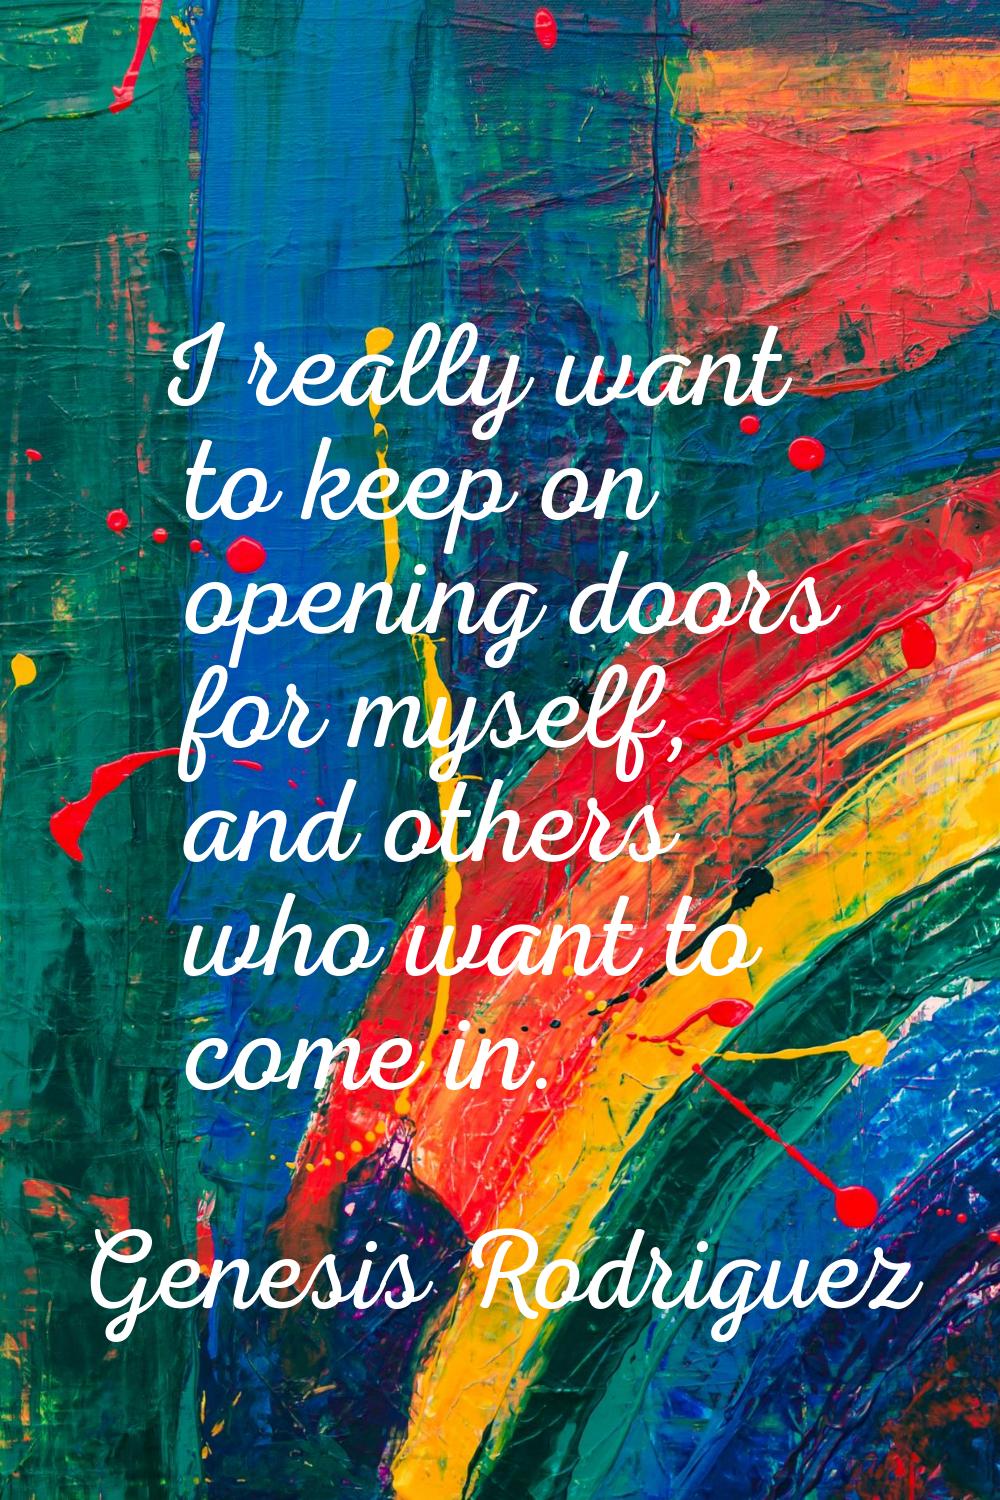 I really want to keep on opening doors for myself, and others who want to come in.